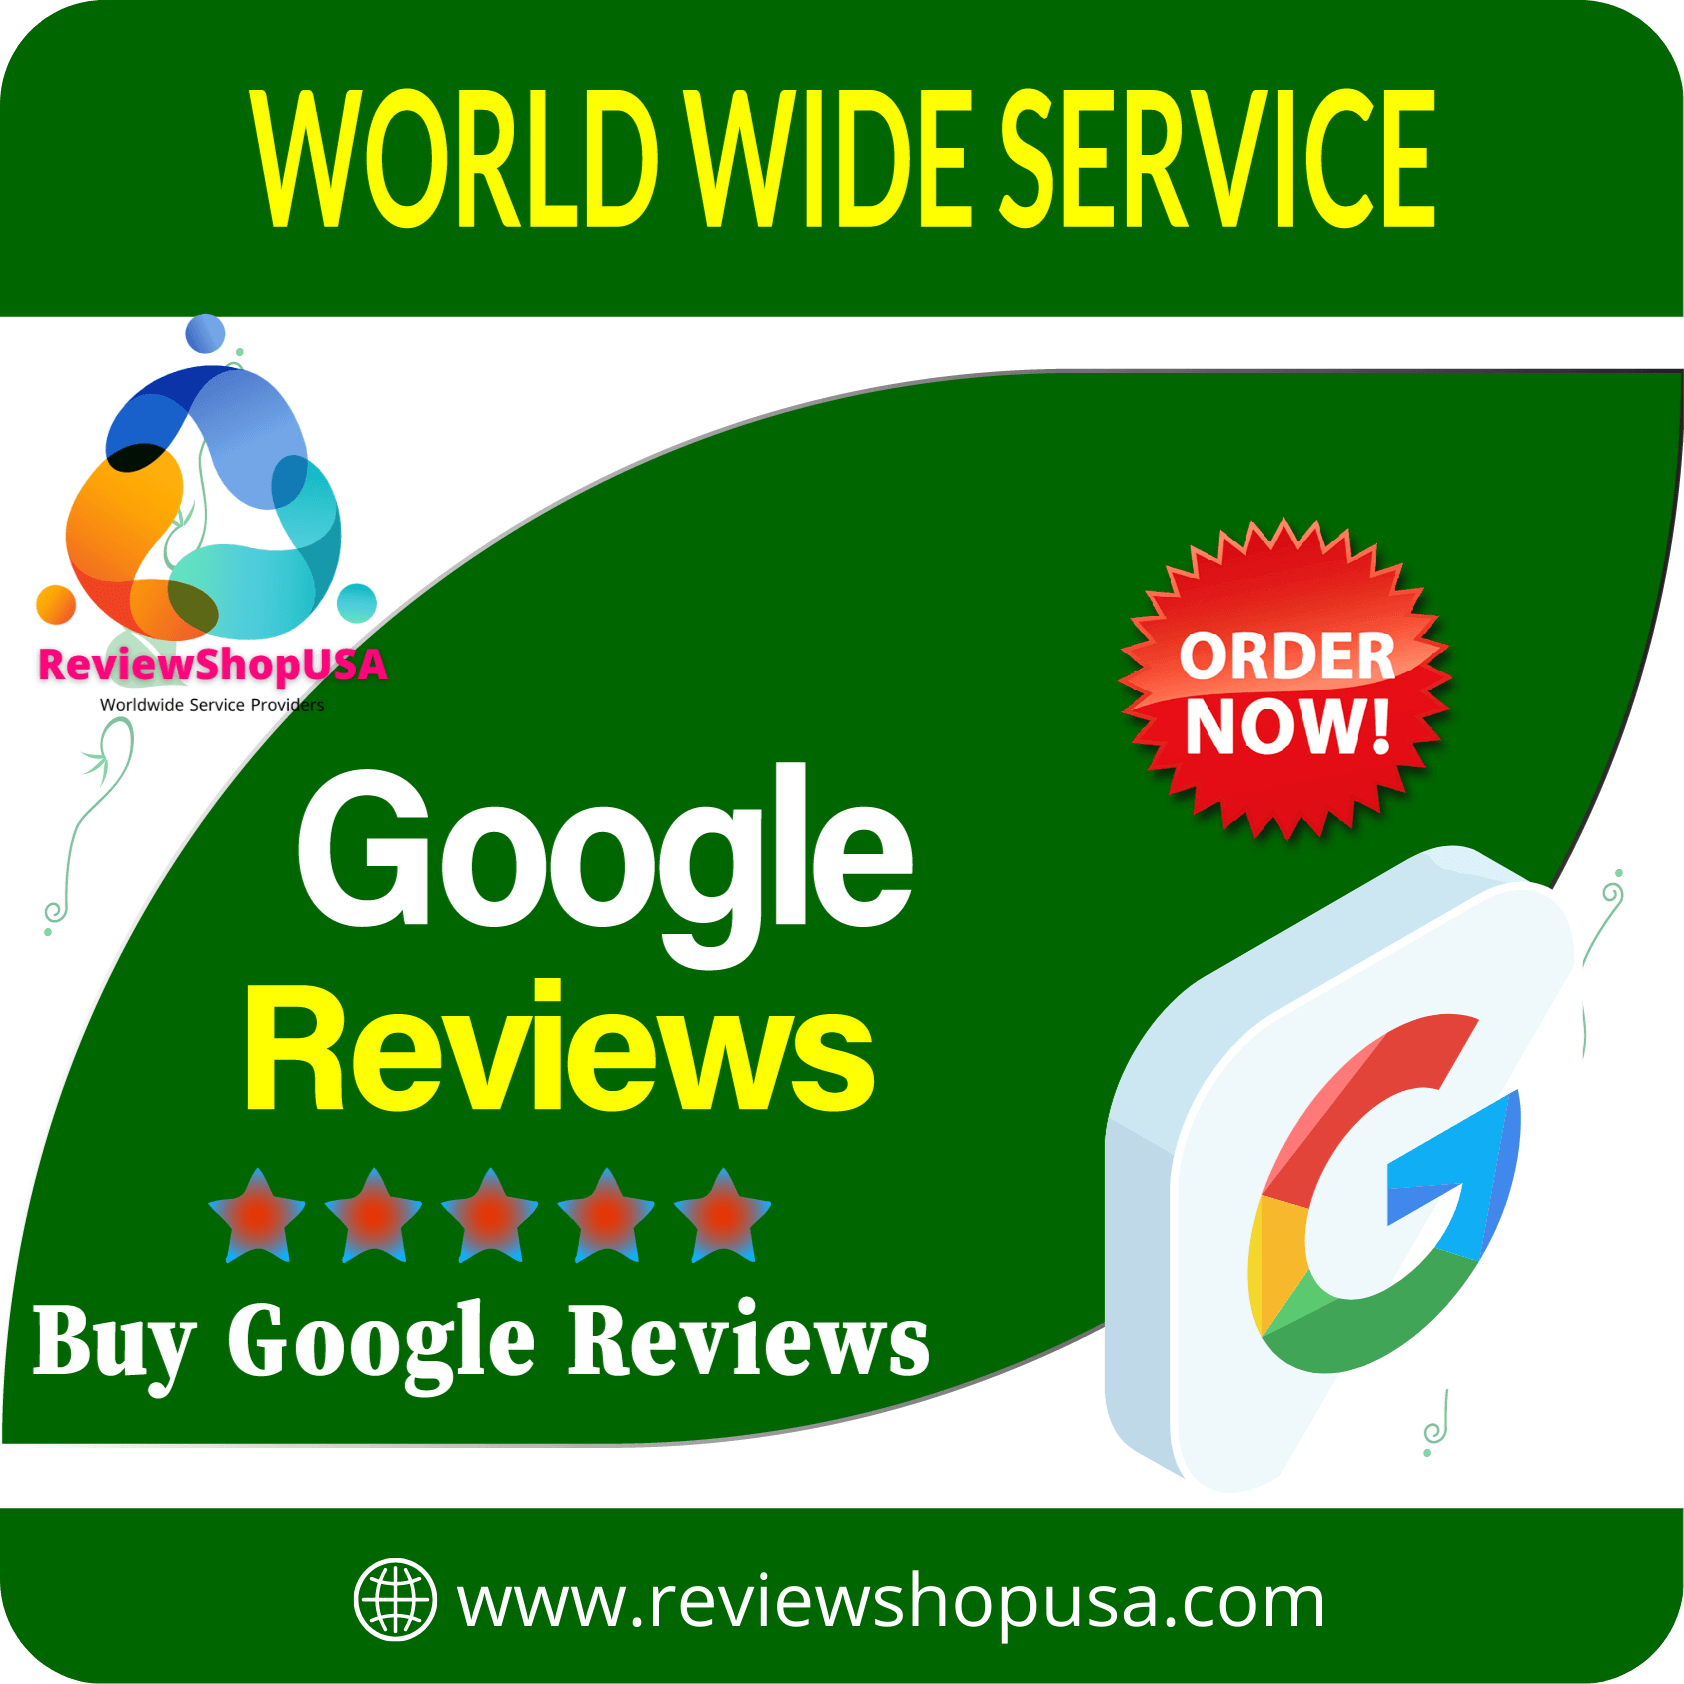 Buy Google Reviews - Buy 5 Star Reviews for Your Business..